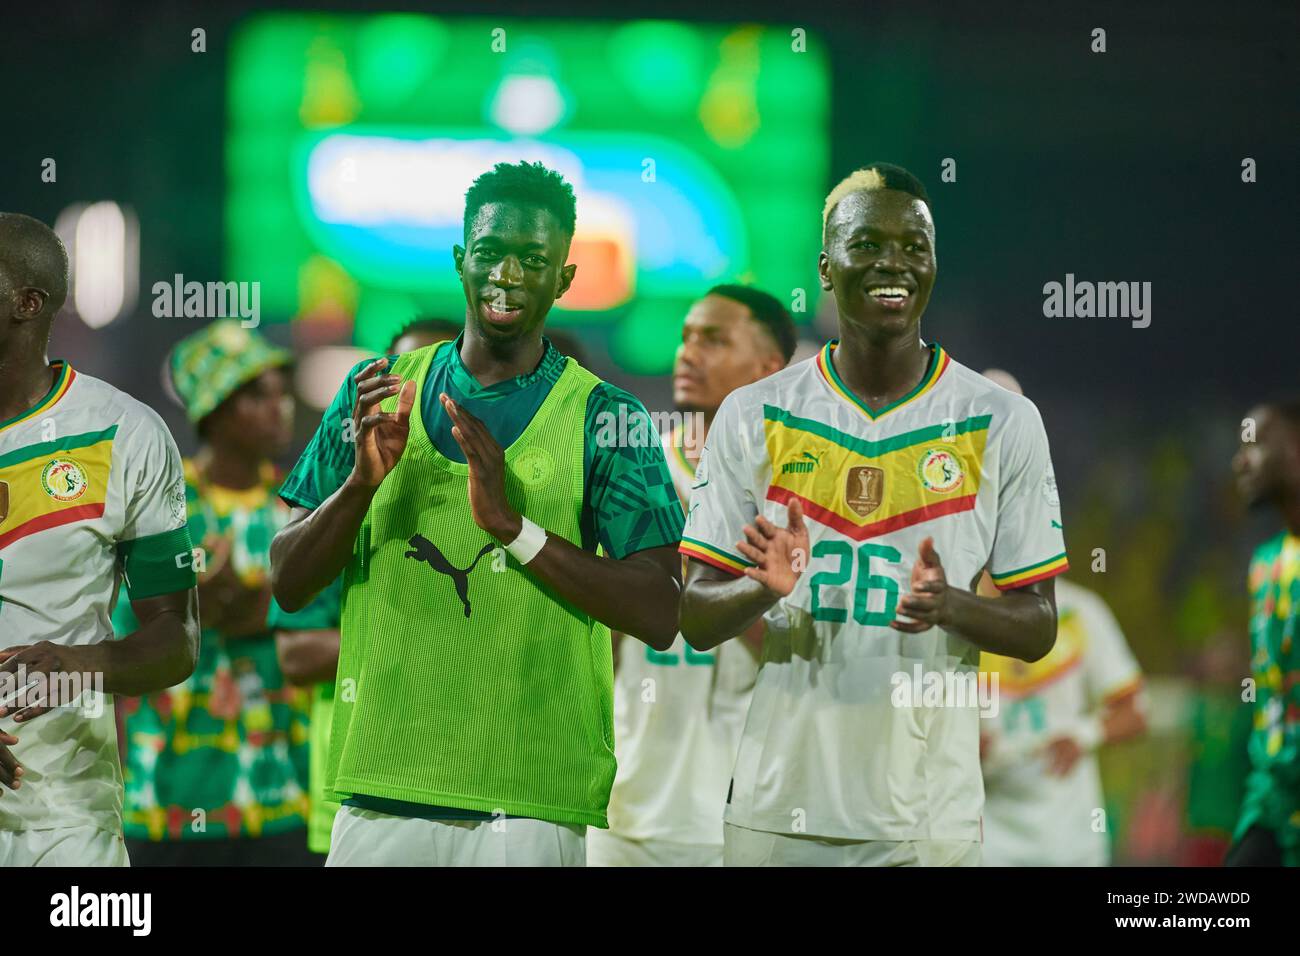 Highlights of the match between Senegal and Cameroon at the Africa Cup of Nations 2023, Senegalese players waving to their supporters in the stadium Stock Photo